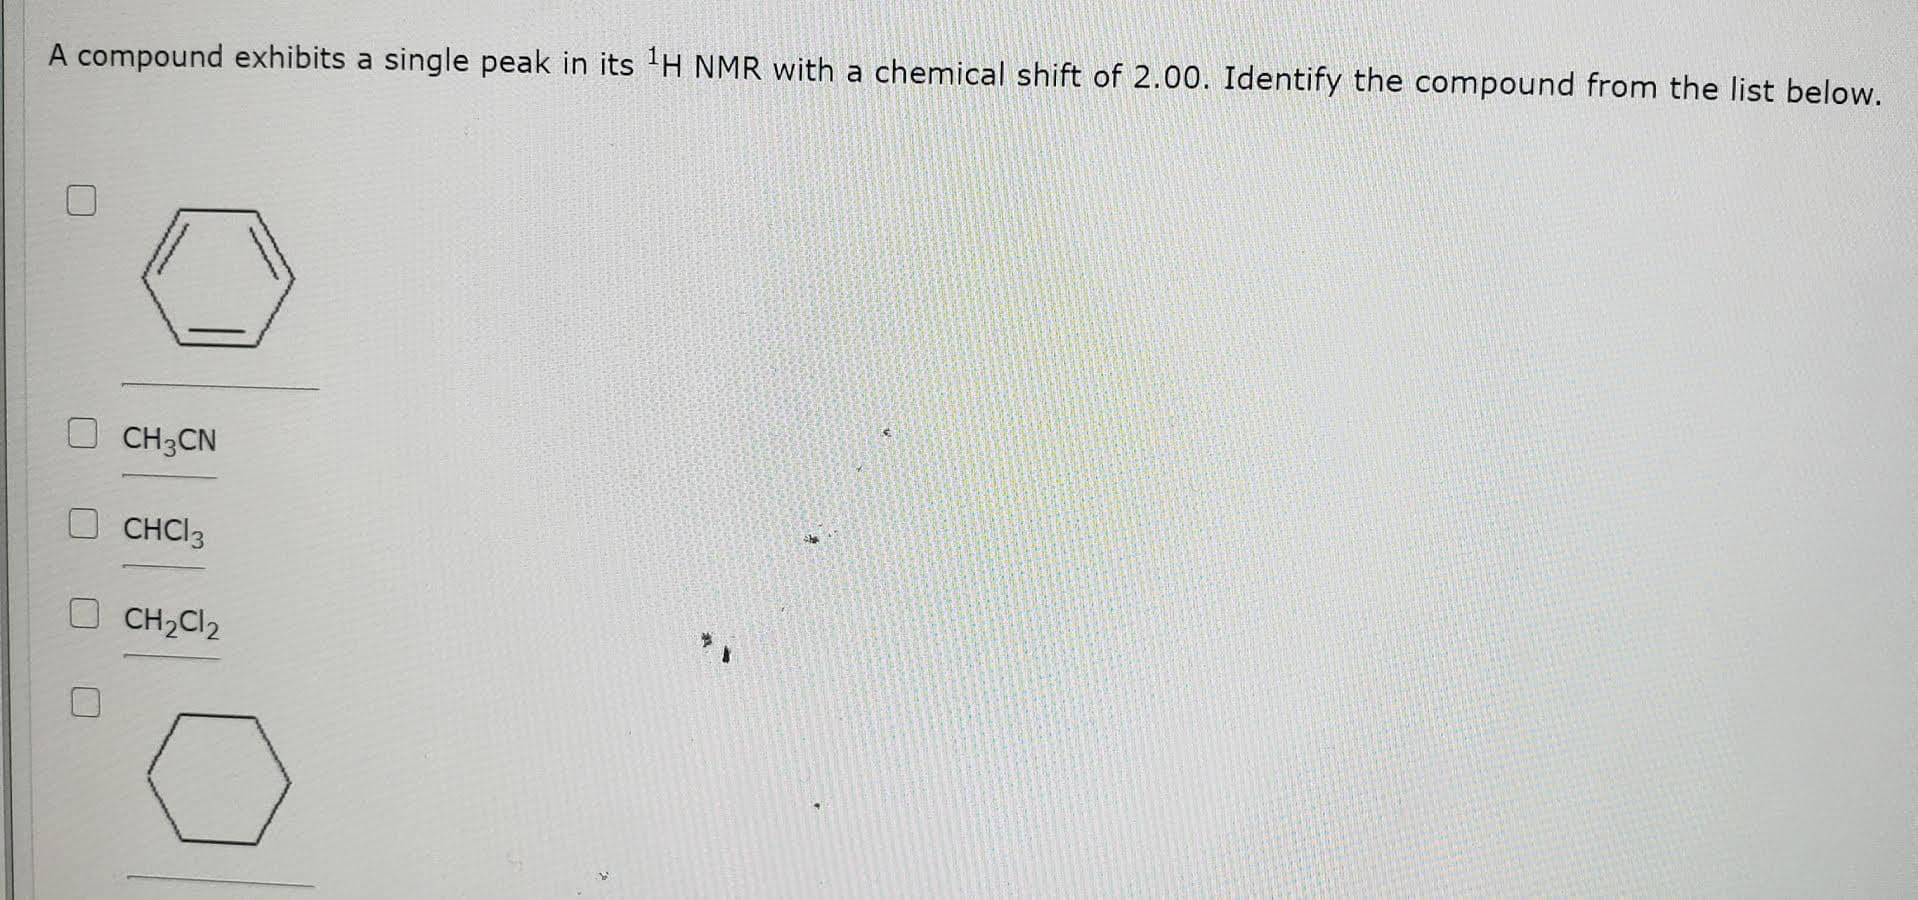 A compound exhibits a single peak in its 'H NMR with a chemical shift of 2.00. Identify the compound from the list below.
CH3CN
CHCI3
CH2CI2
